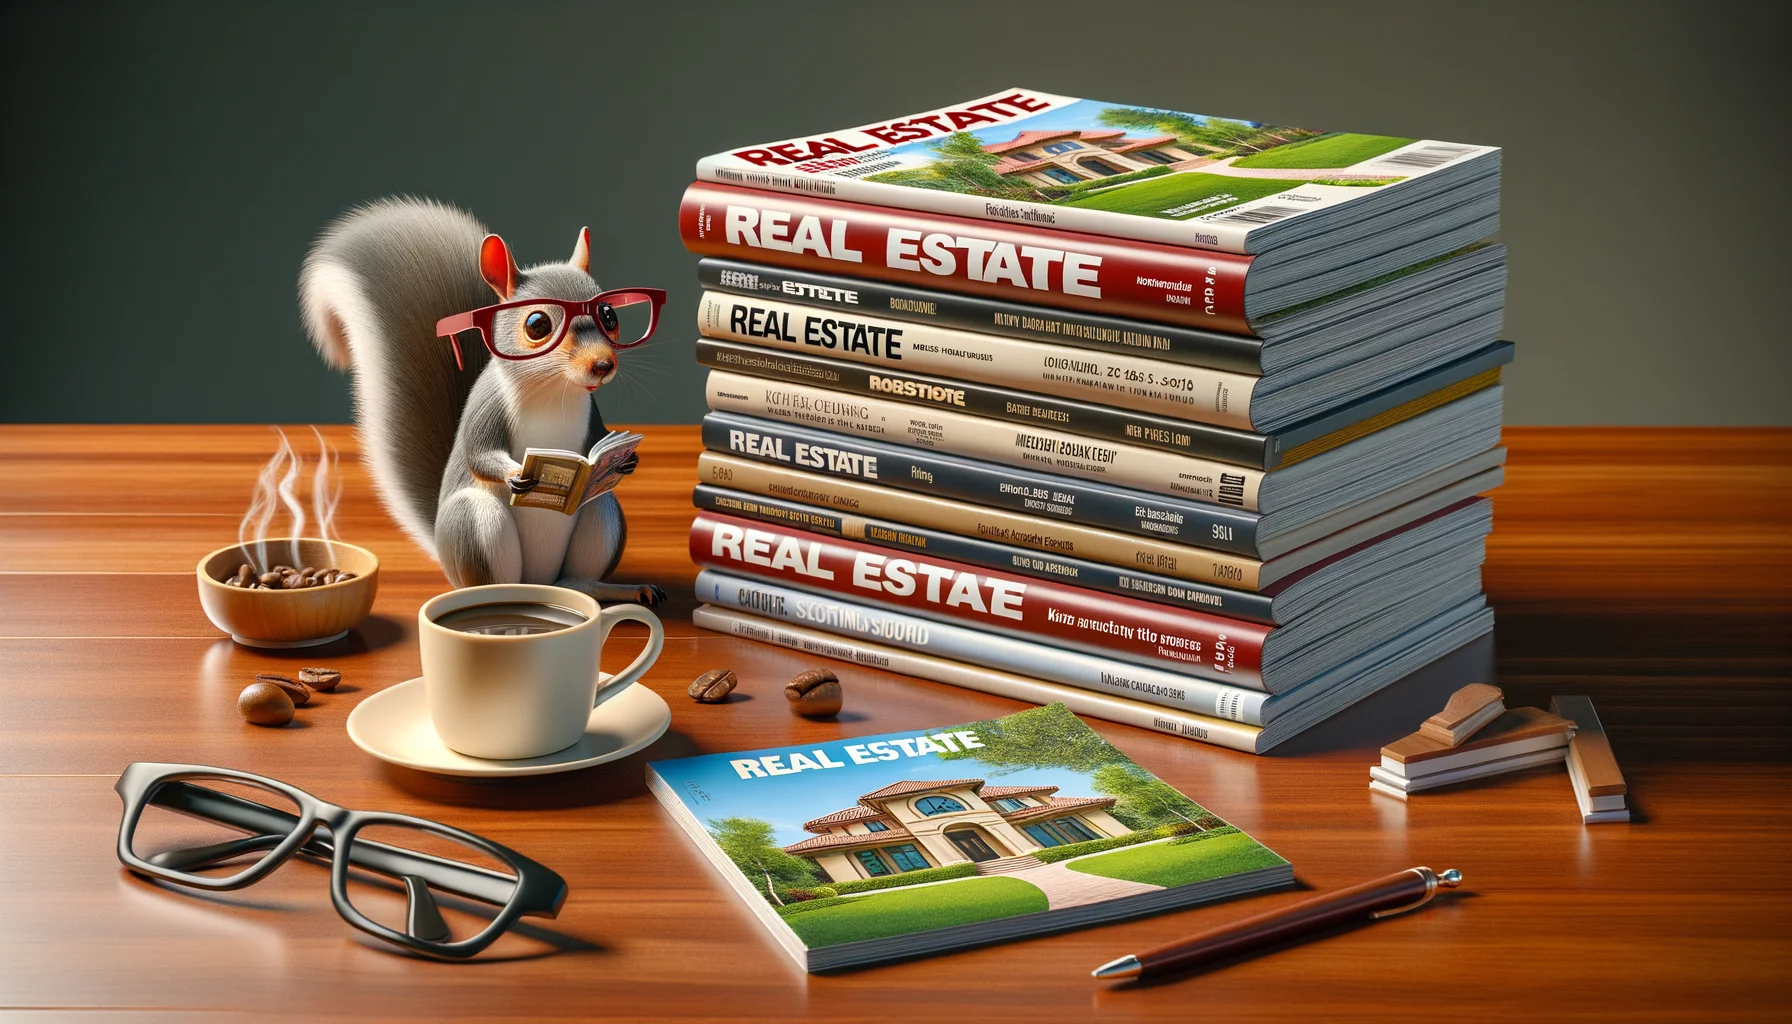 Create a humorous, photorealistic image that showcases various real estate journals and publications in an ideal setting. Depict a stack of real estate magazines neatly arranged on a polished mahogany table. Next to the stack, a hot cup of coffee and a pair of glasses suggest someone's in the midst of reading. The picture on the top magazine shows a beautiful, luxurious estate with a lush, green lawn. There's also a small snickering squirrel on the table, wearing miniature glasses and 'reading' a small mock-up of one of the real estate magazines, adding a cute and funny touch to the scene.